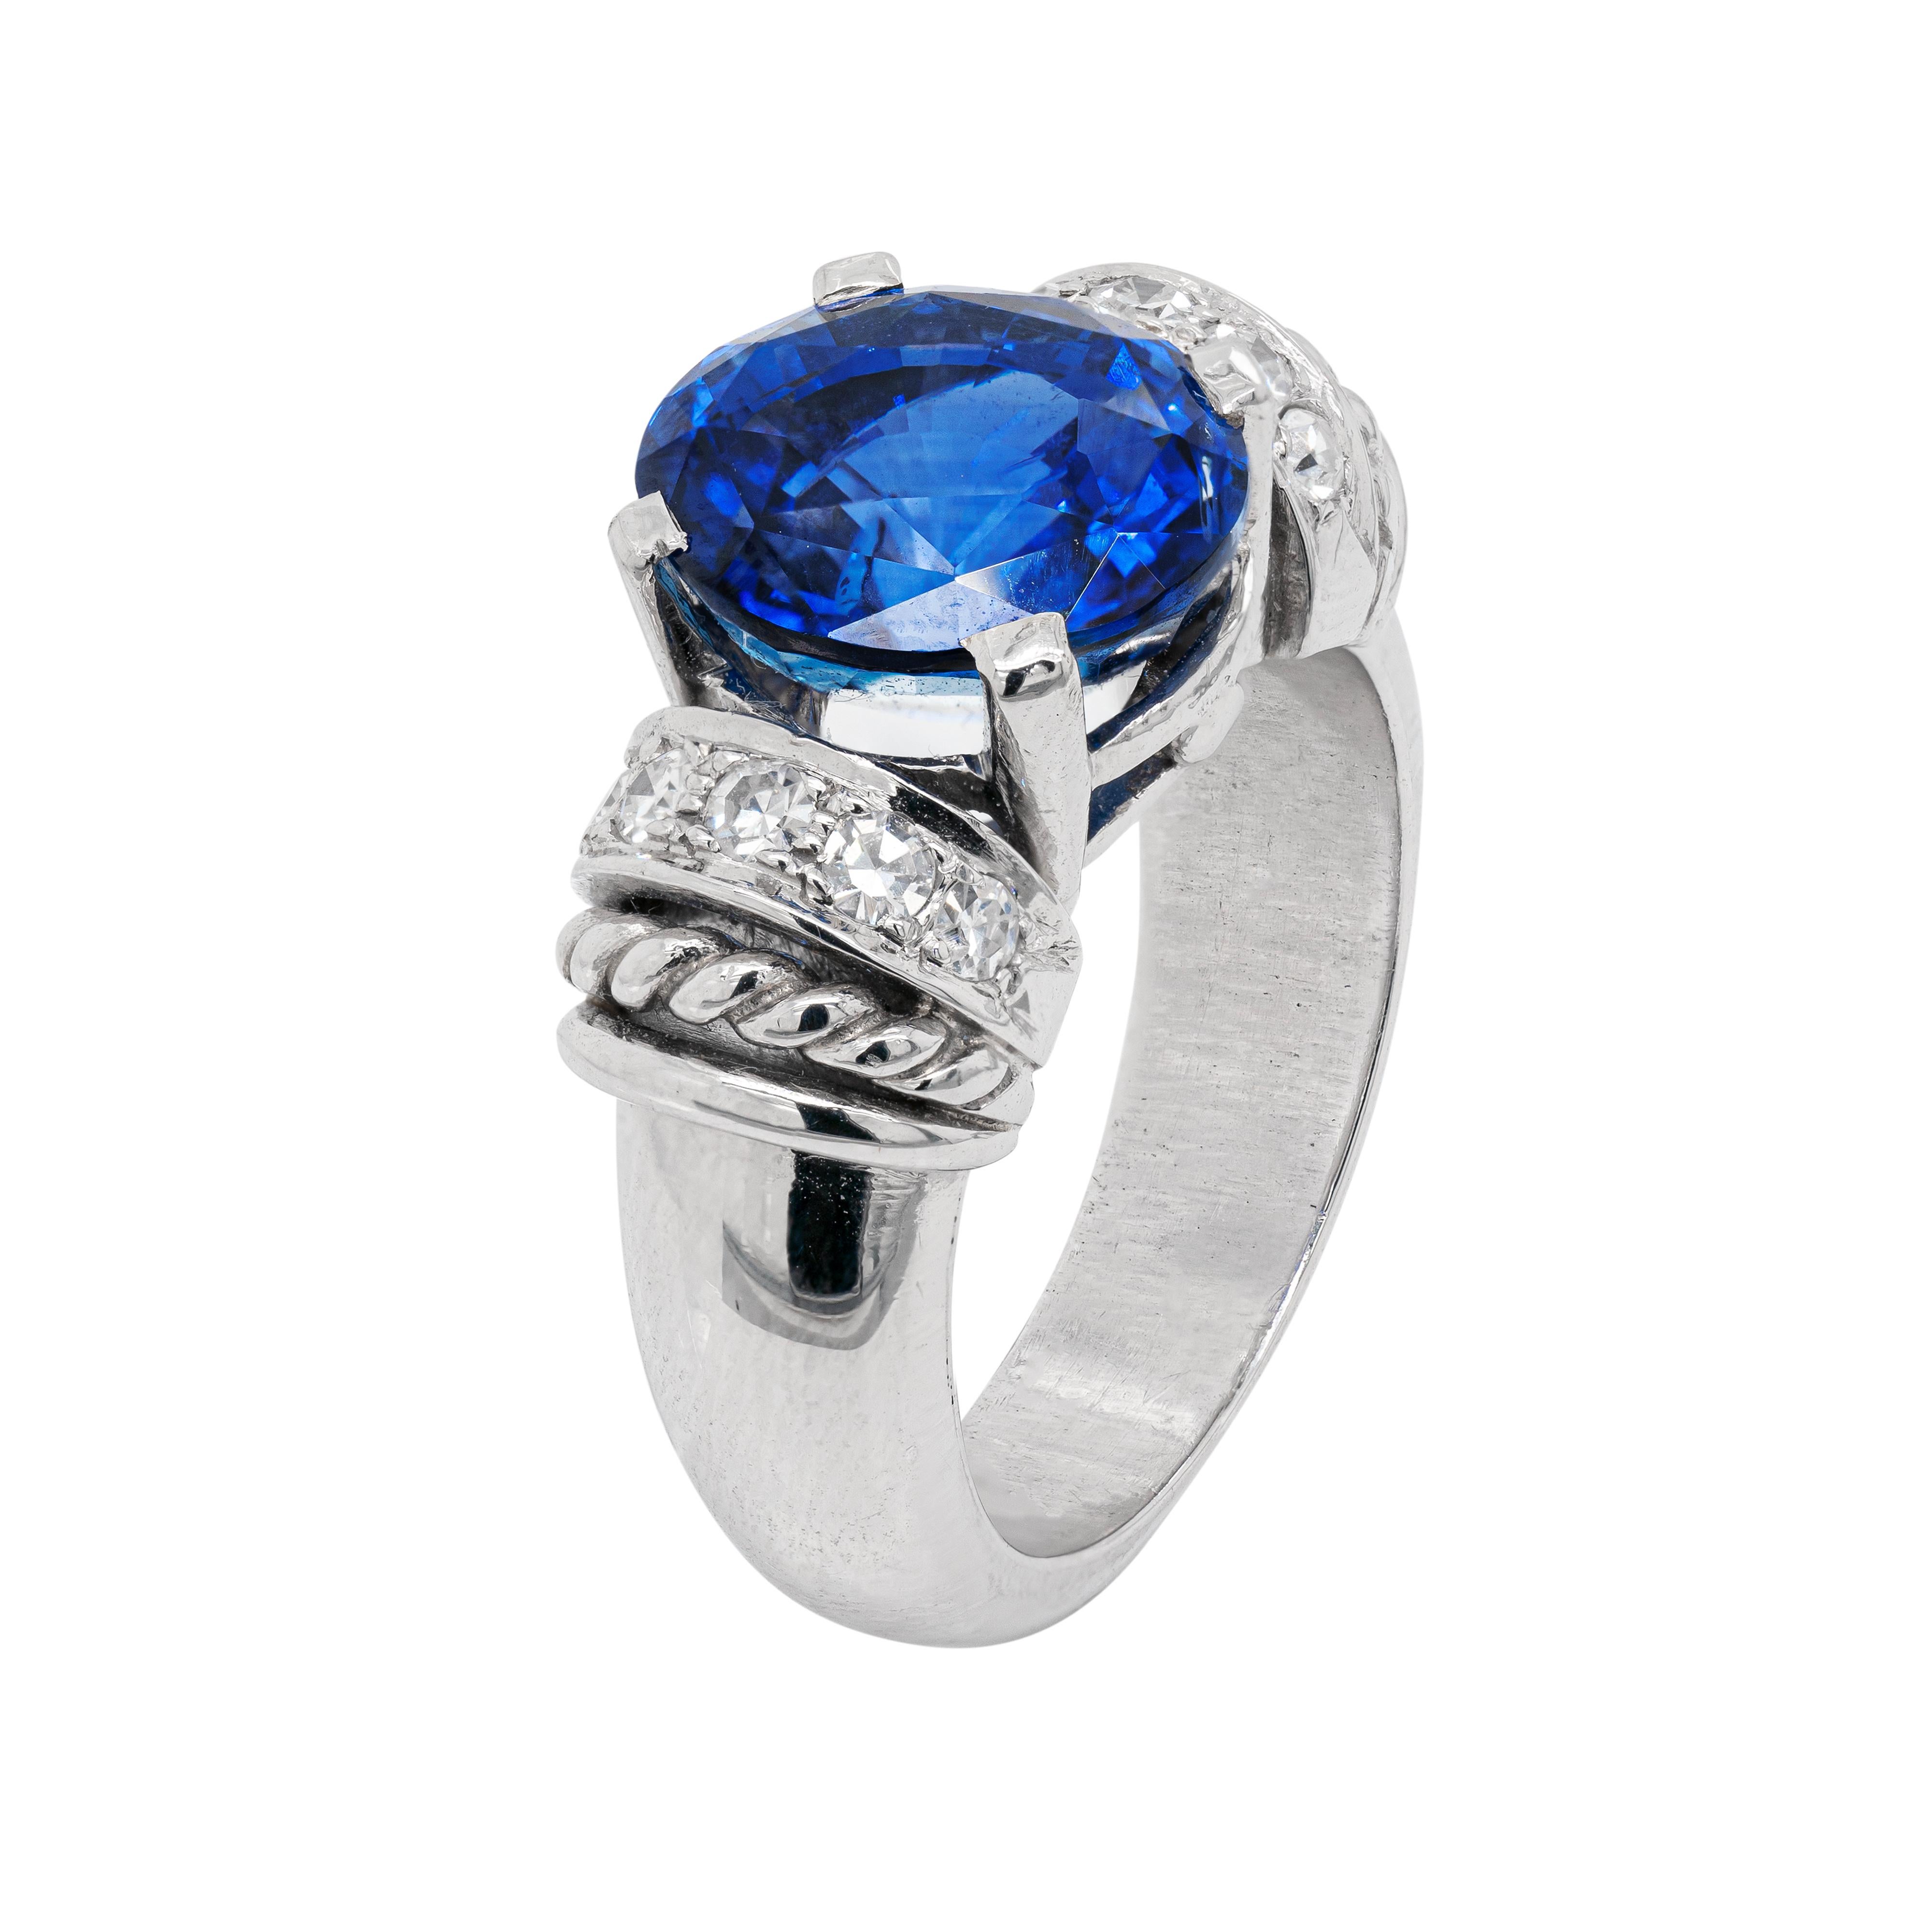 This wonderful platinum dress ring features an impressive royal blue oval sapphire weighing 6.60ct, mounted in a four claw, open back setting. The vibrant gemstone is beautifully accompanied by five round eight cut diamonds on either side, weighing